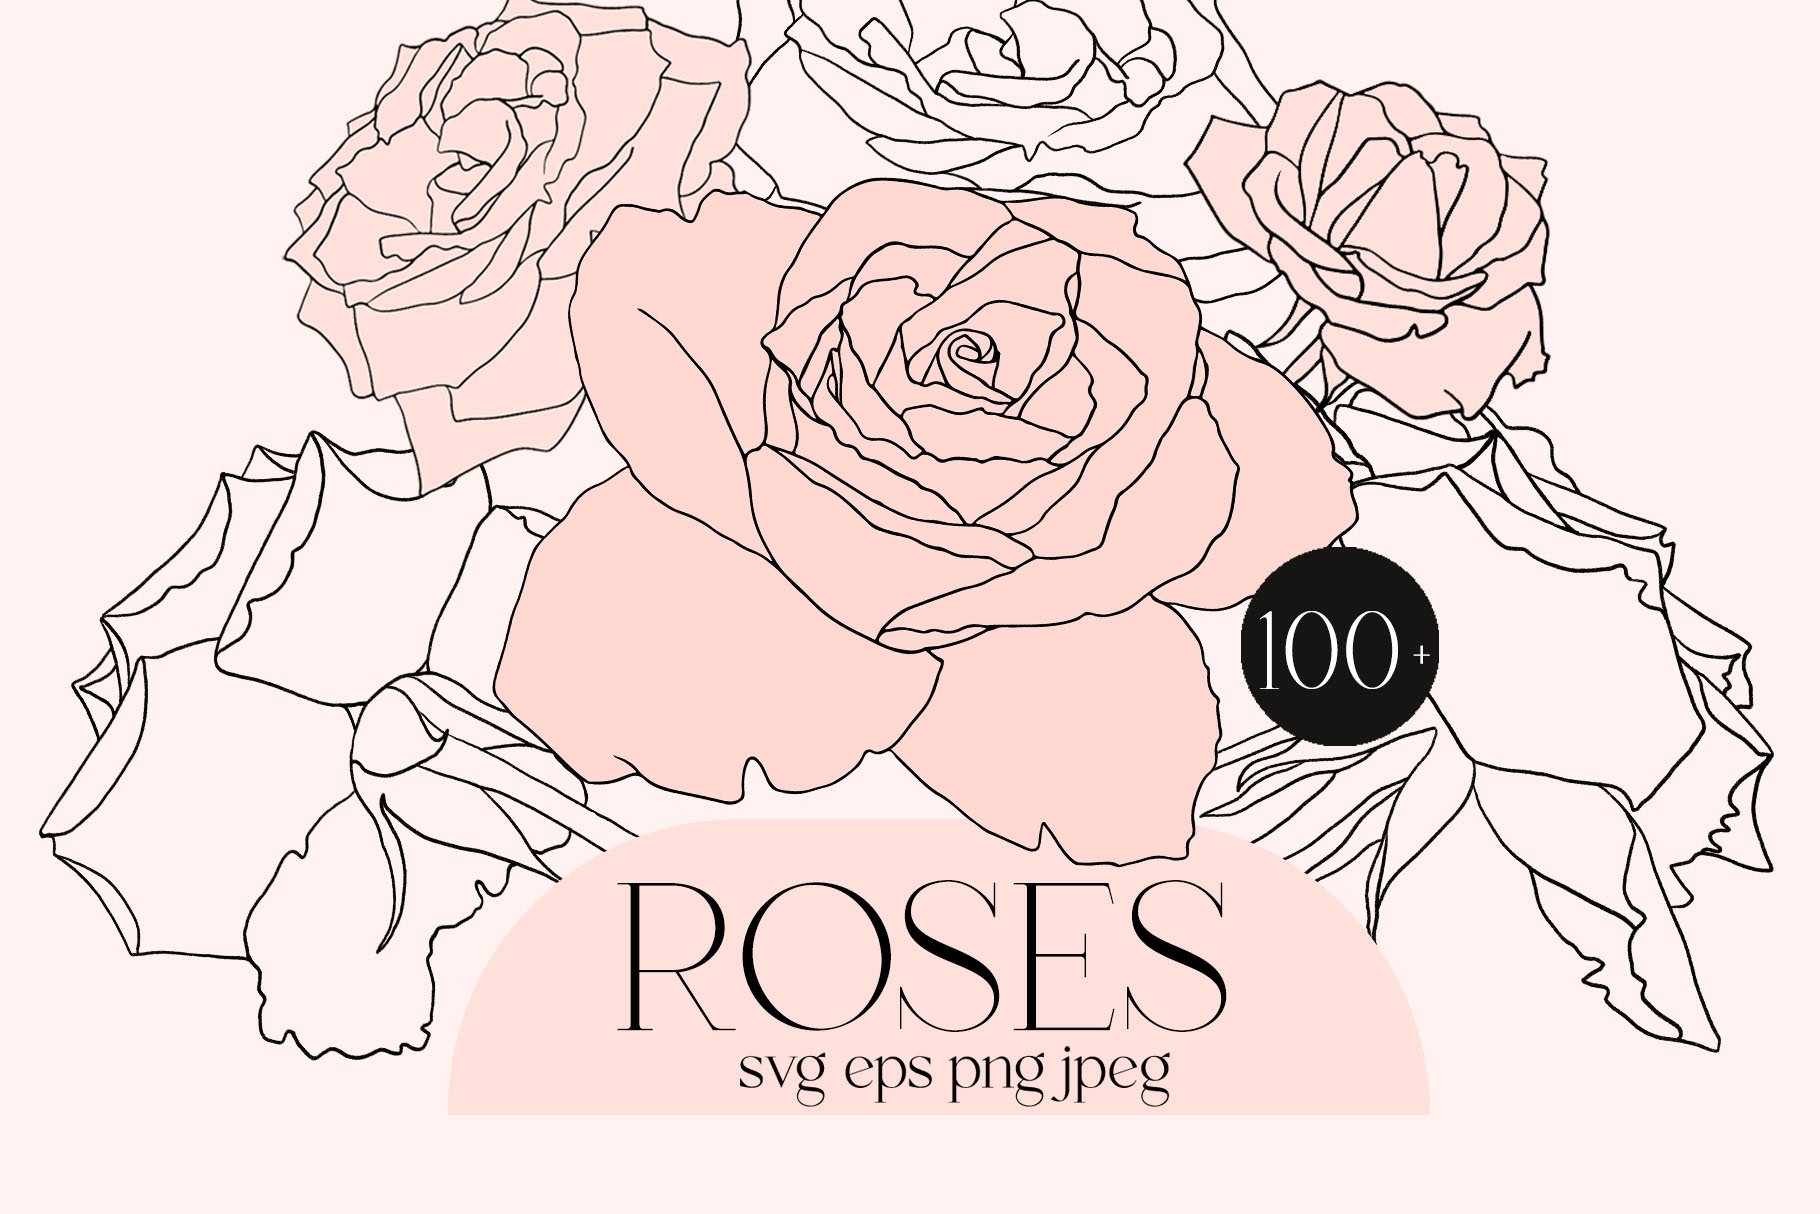 Aesthetic Line Art Hd Transparent, Rose Aesthetic Line Art, Rose Drawing, Rose  Sketch, Rose Line Art PNG Image For Free Download